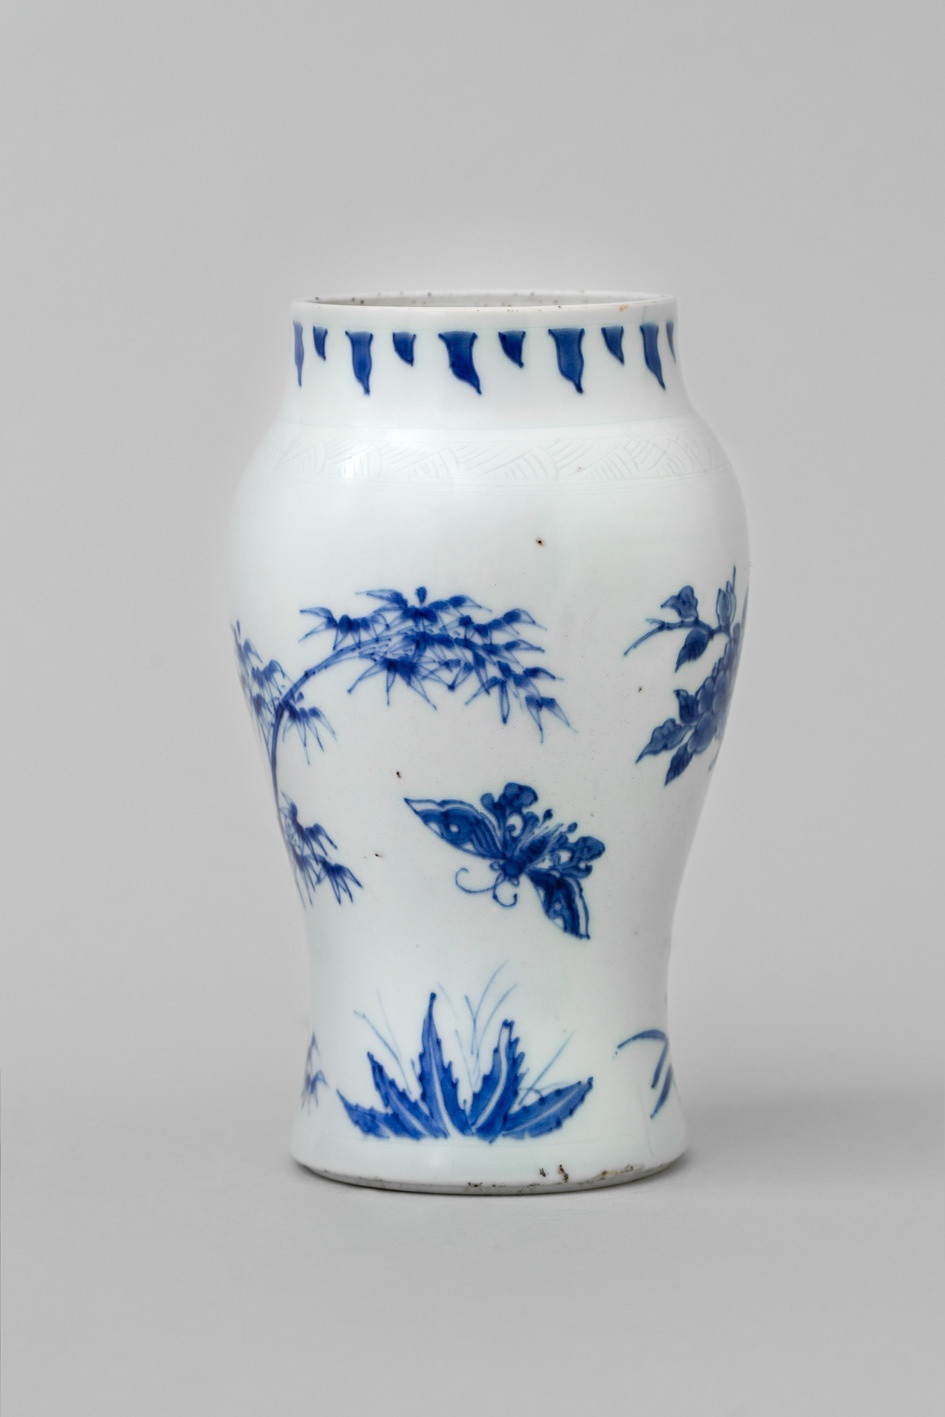 23 Fabulous Chinese Porcelain Vase 2022 free download chinese porcelain vase of a chinese transitional blue and white vase shunzhi 1644 1661 with regard to a chinese transitional blue and white vase